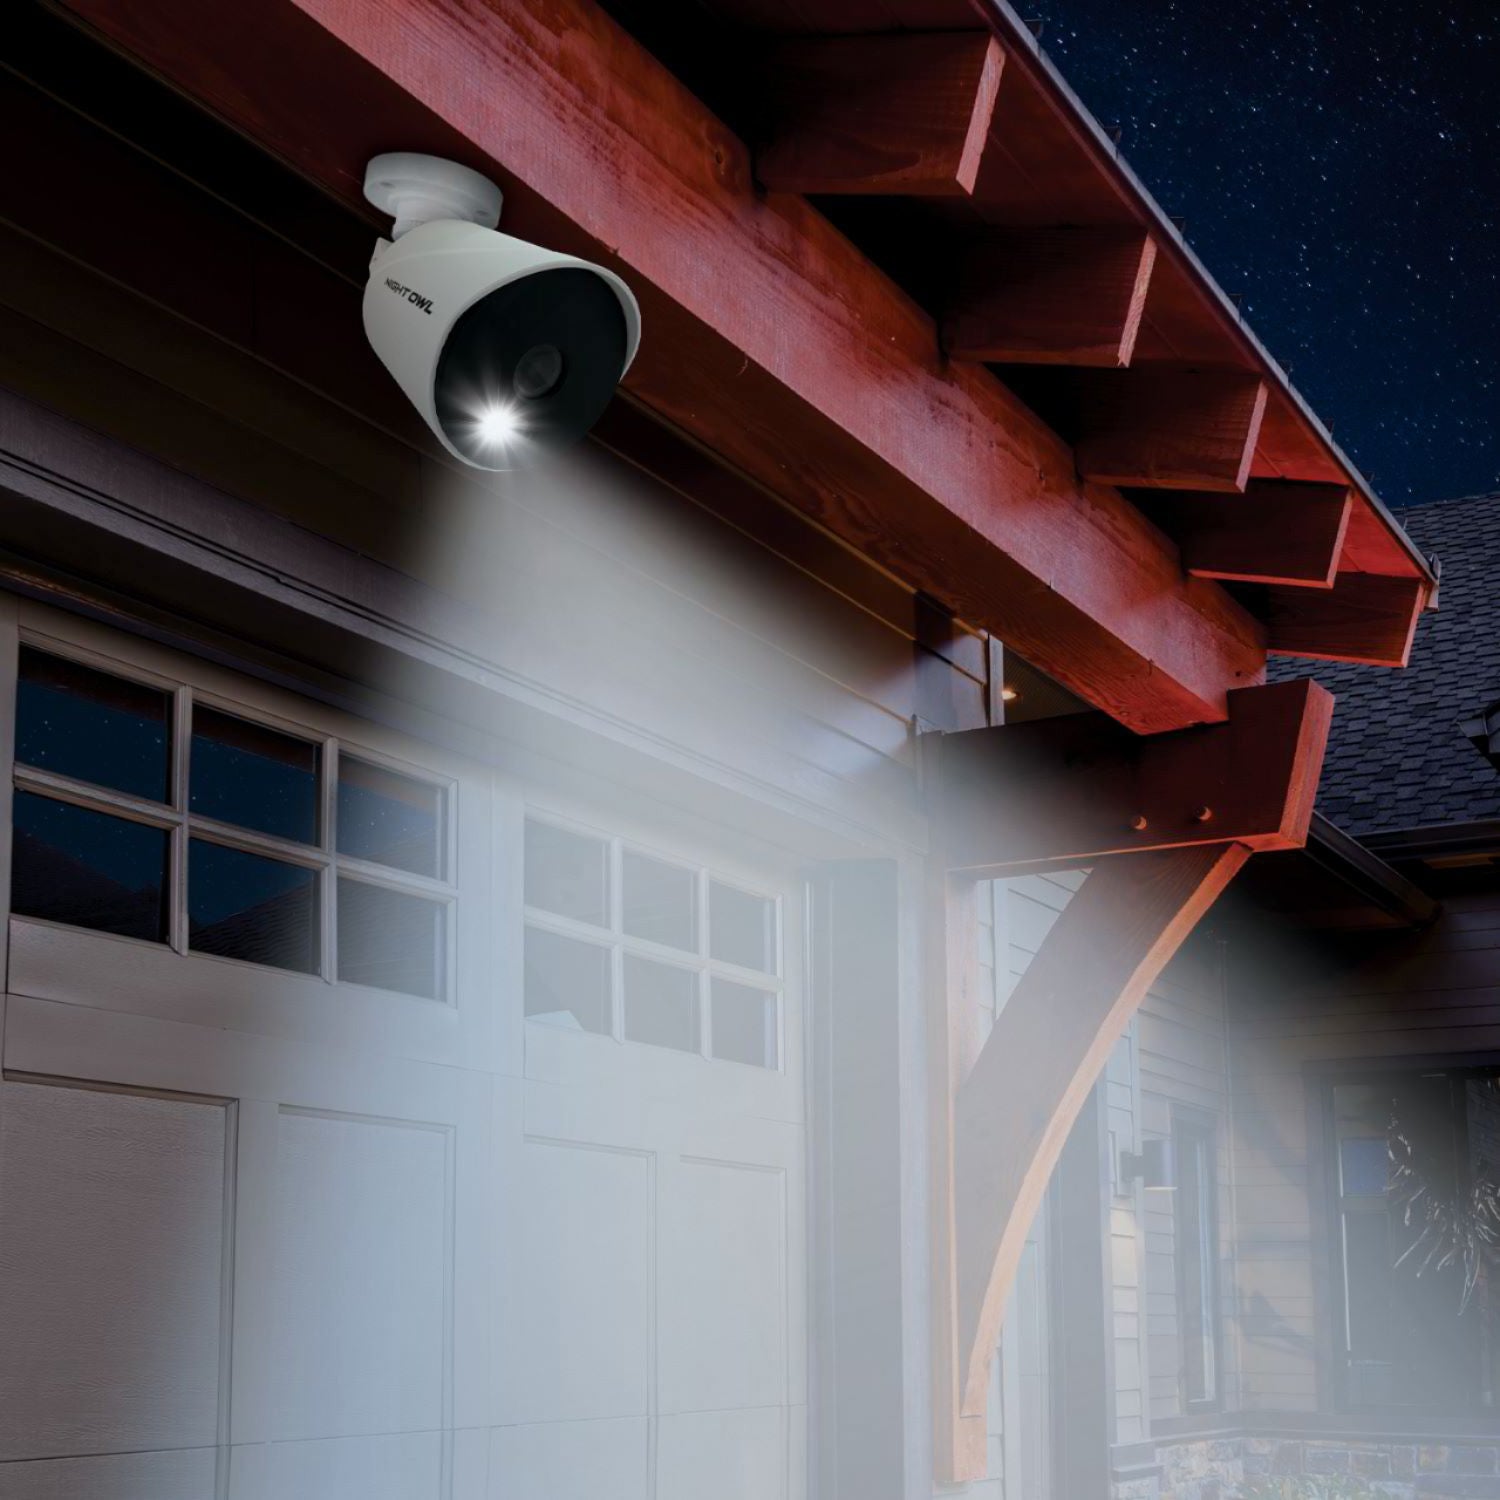 Home security camera above garage at night